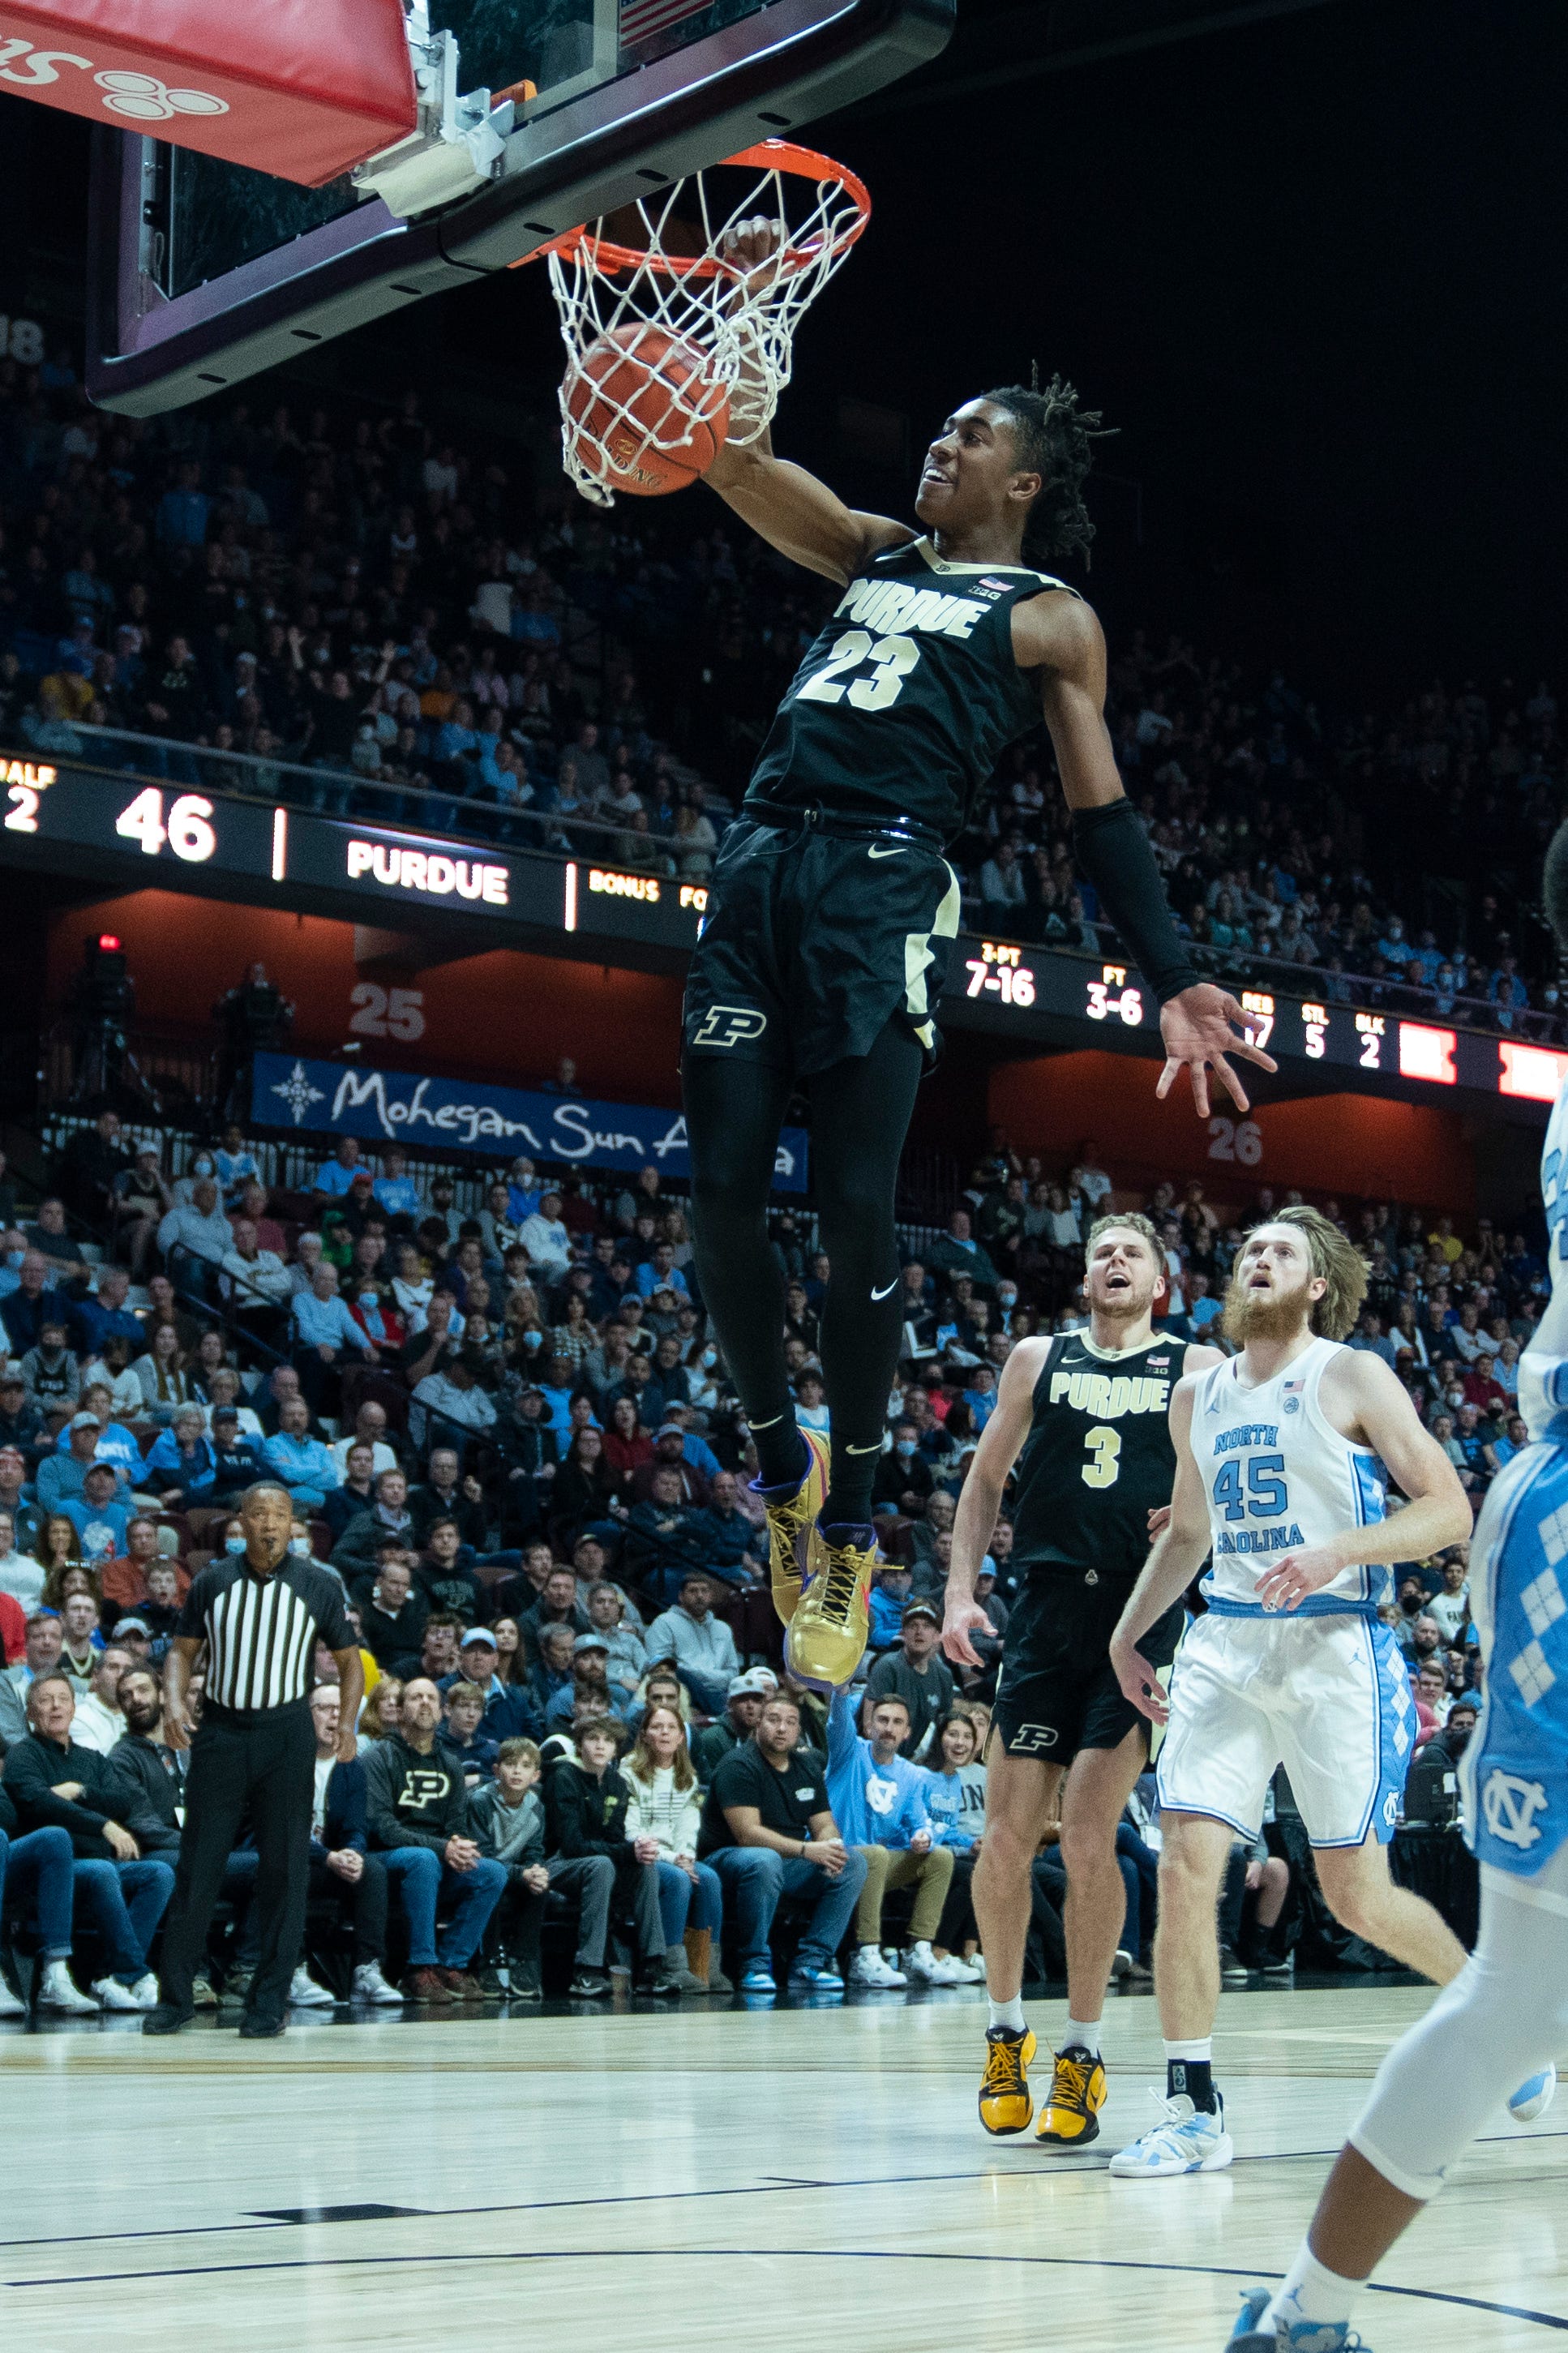 He was more impressive in person': Jaden Ivey's sequence helps Purdue basketball pass first test